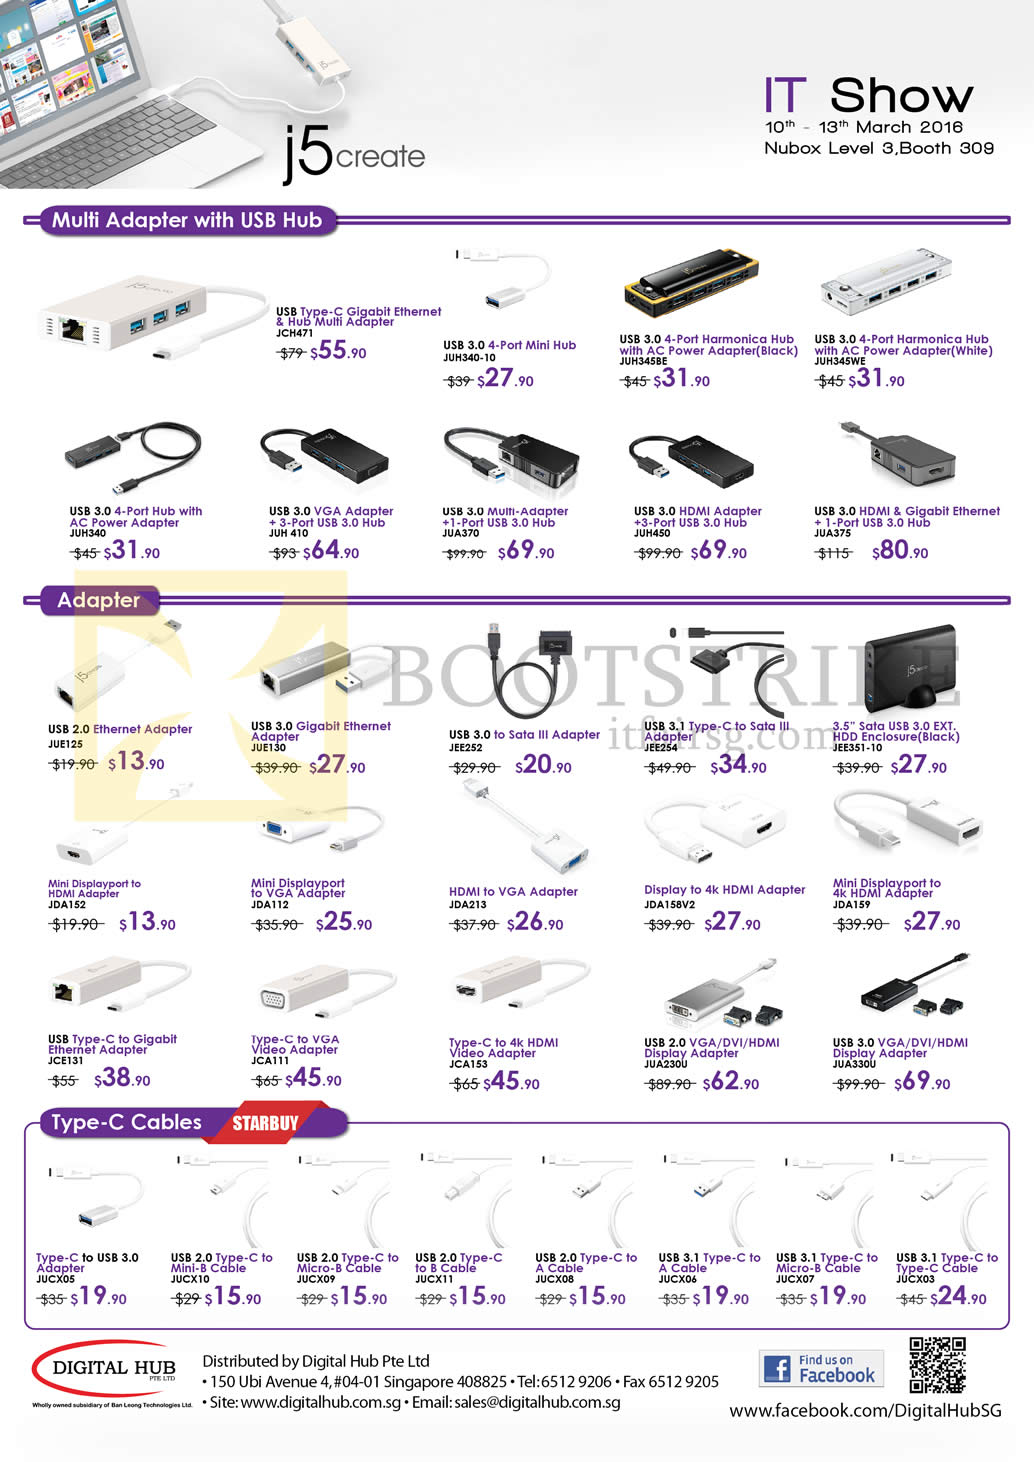 IT SHOW 2016 price list image brochure of Nubox J5 Create Accessories Multi Adapter, Adapter, Type-C Cables